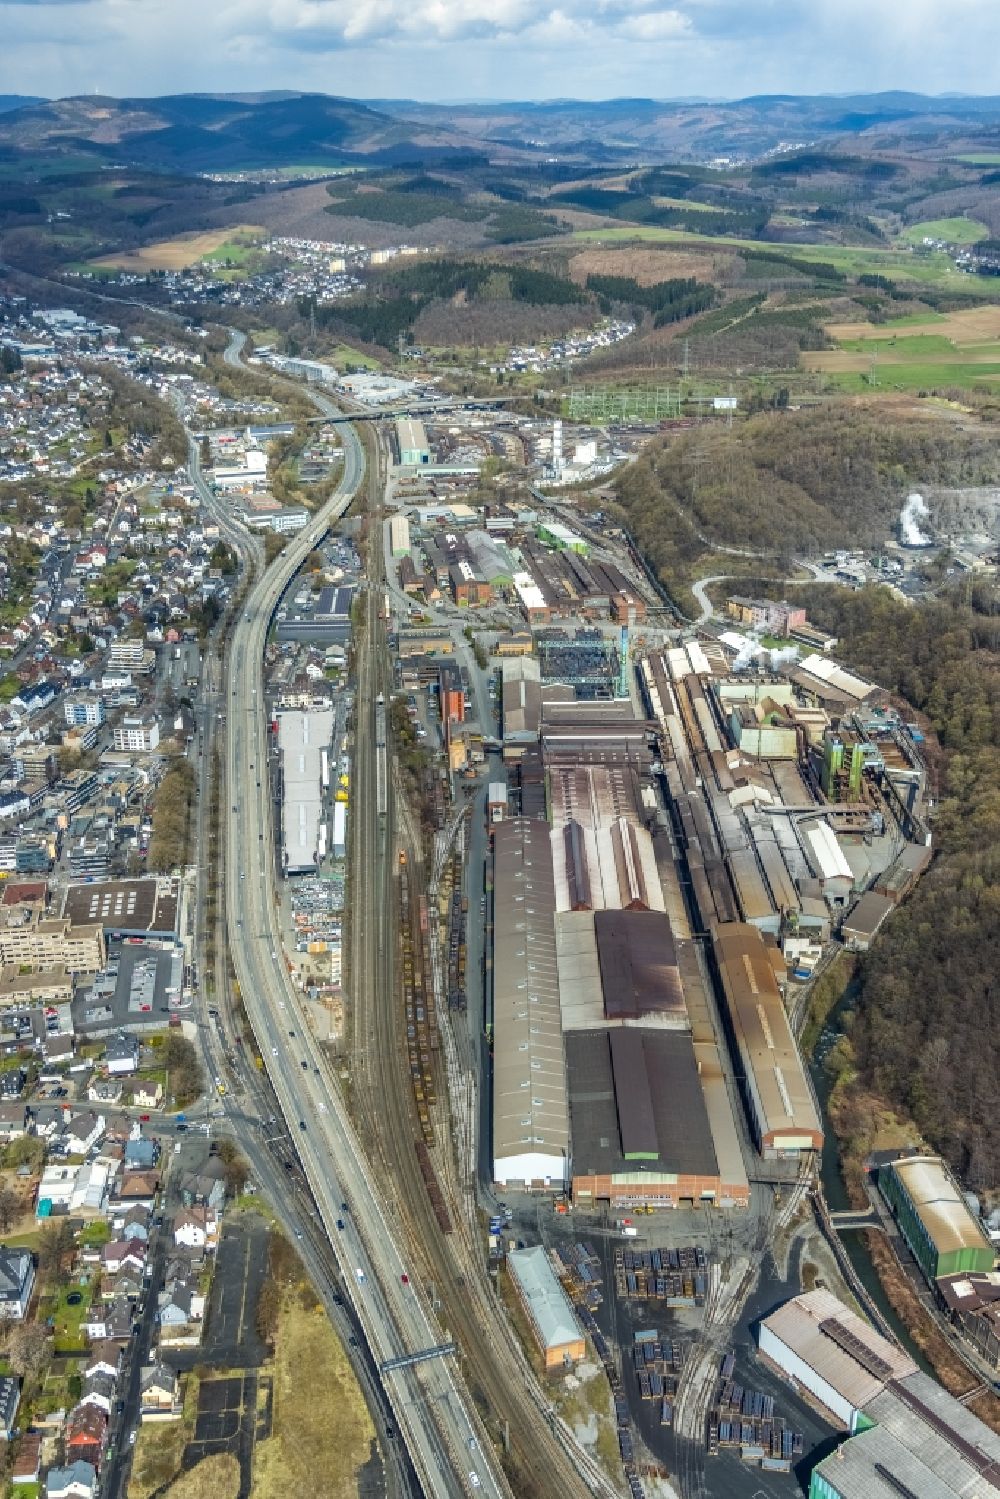 Aerial image Siegen - Technical equipment and production facilities of the steelworks Deutsche Edelstahlwerke GmbH along the road Huetteltalstrasse B54 in Siegen in the state North Rhine-Westphalia